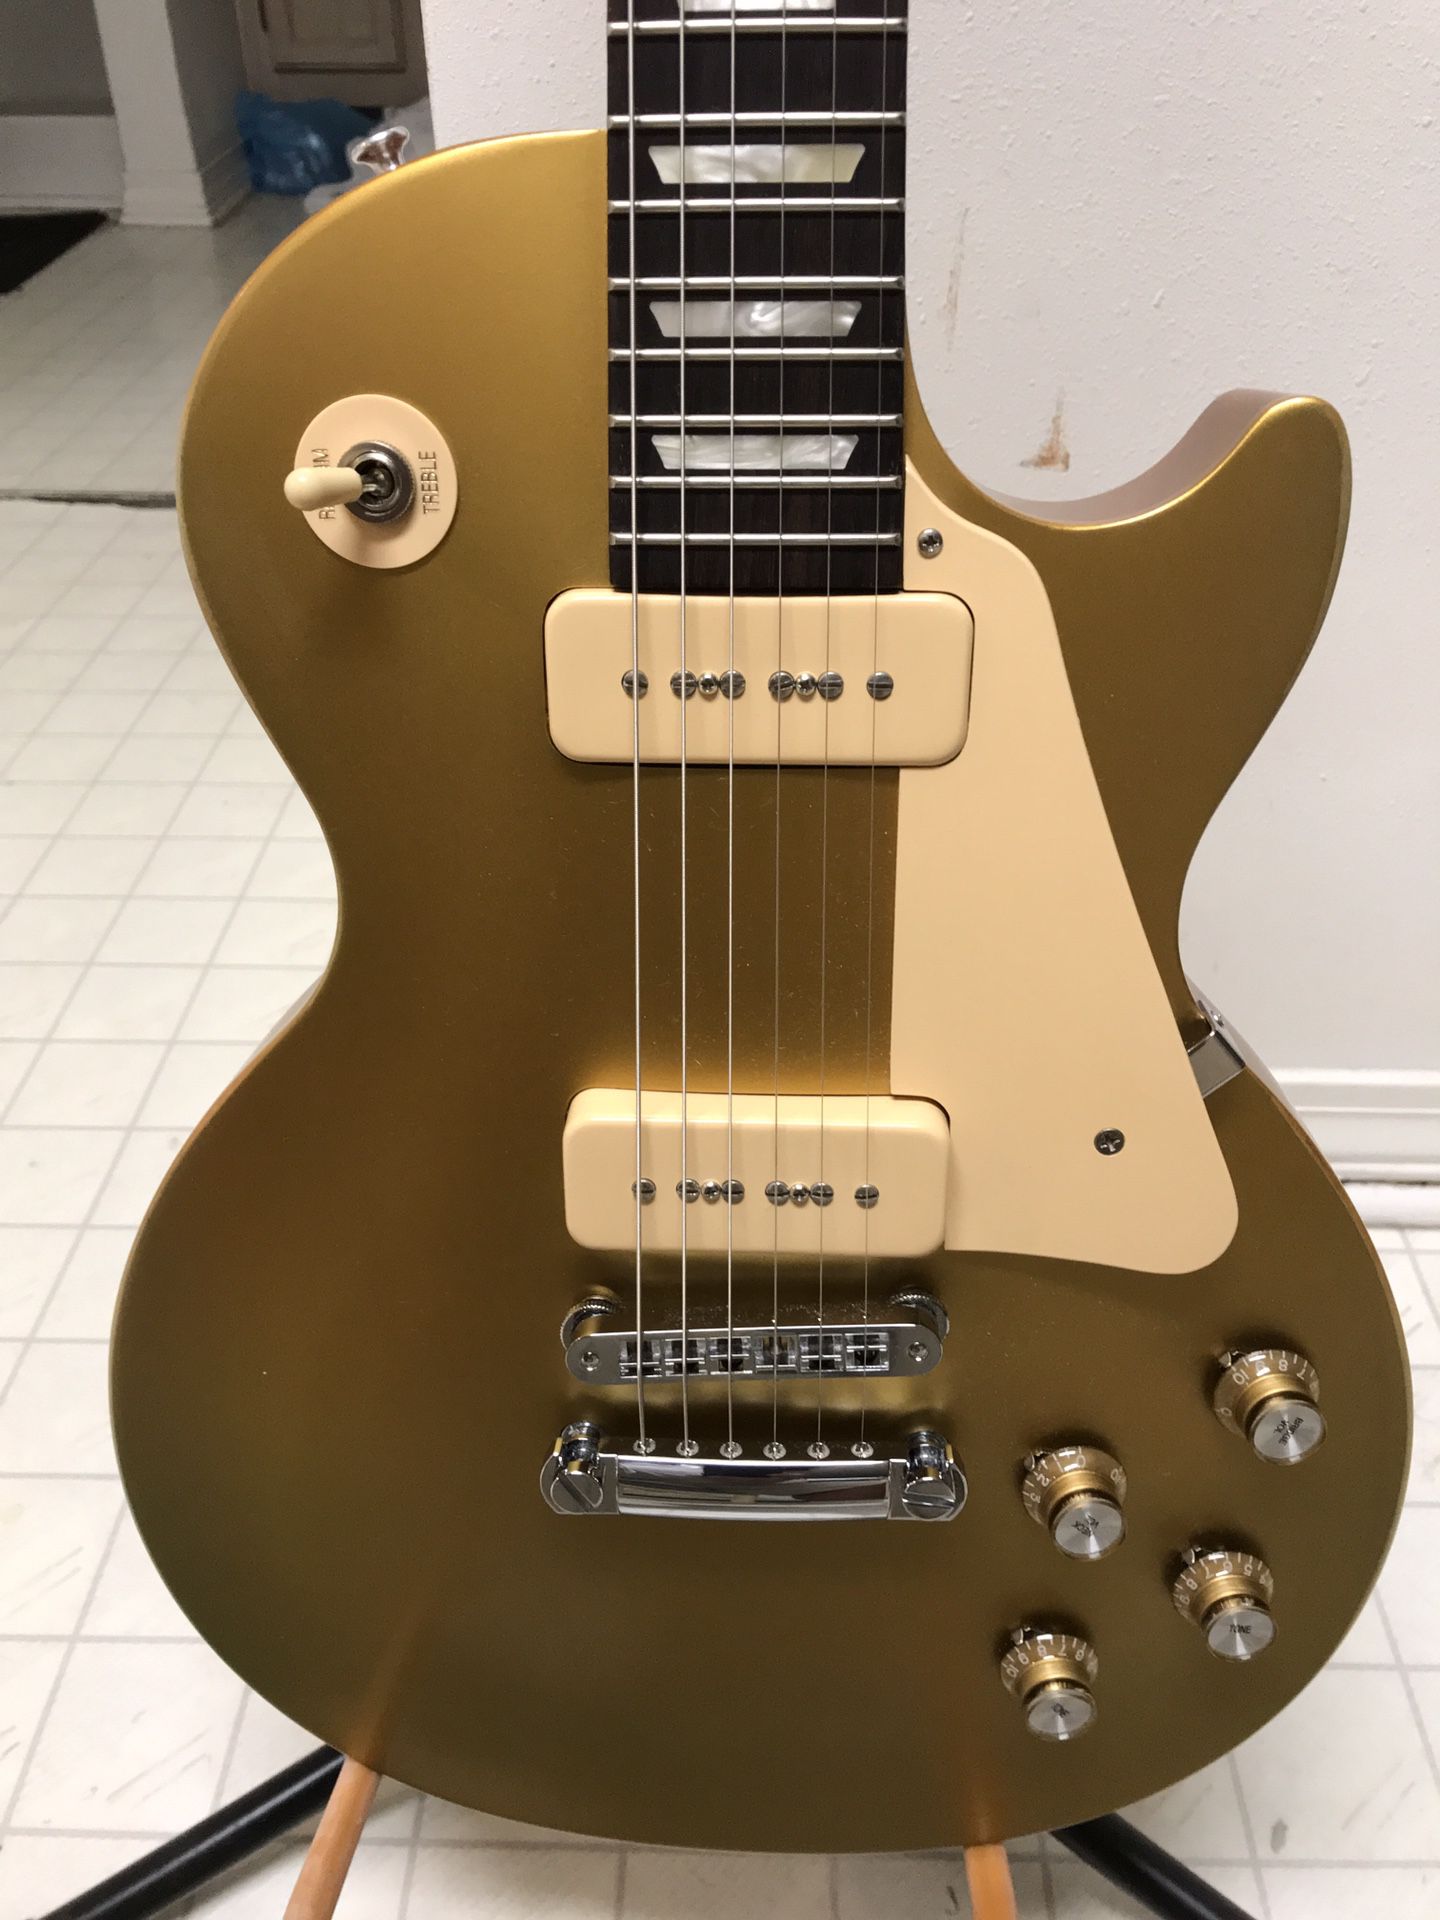 Gibson Les Paul 2010 tribute worn gold